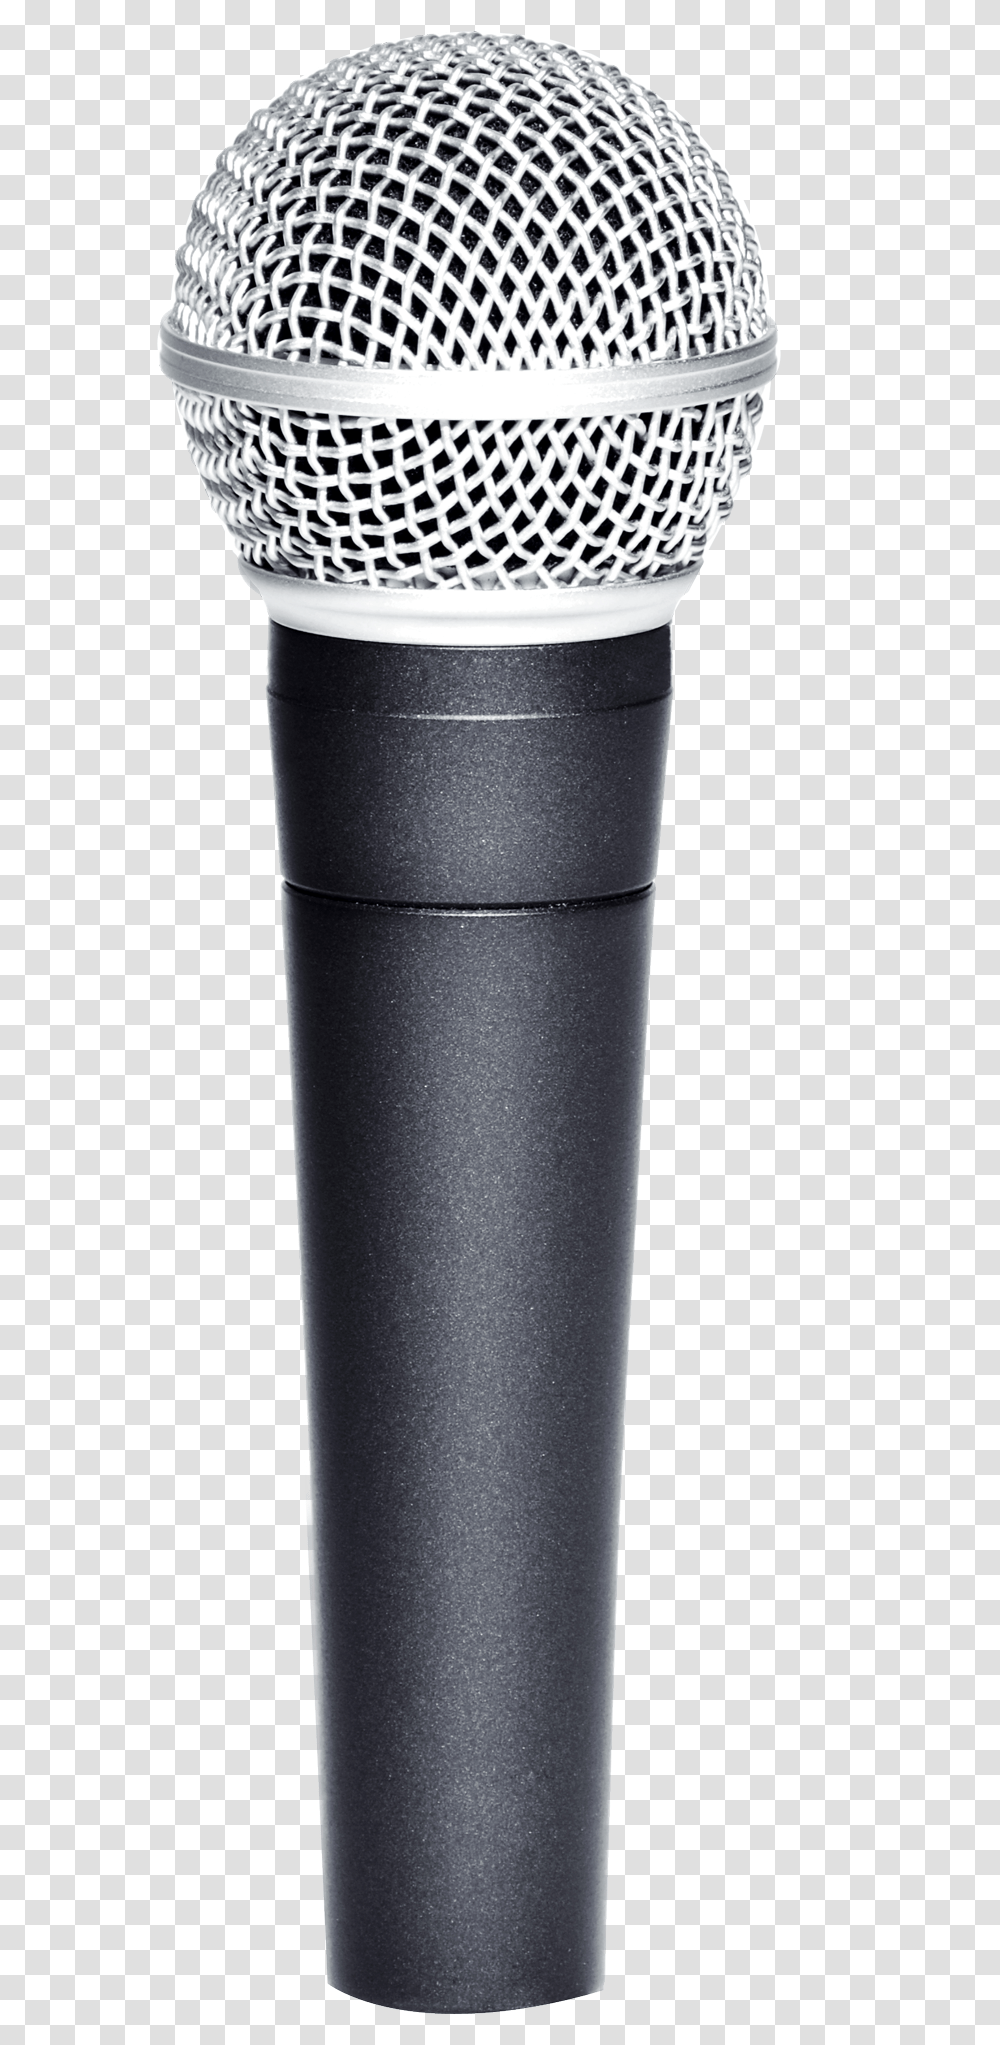 Microphone Image Mic Hd, Shaker, Bottle, Steel, Cup Transparent Png